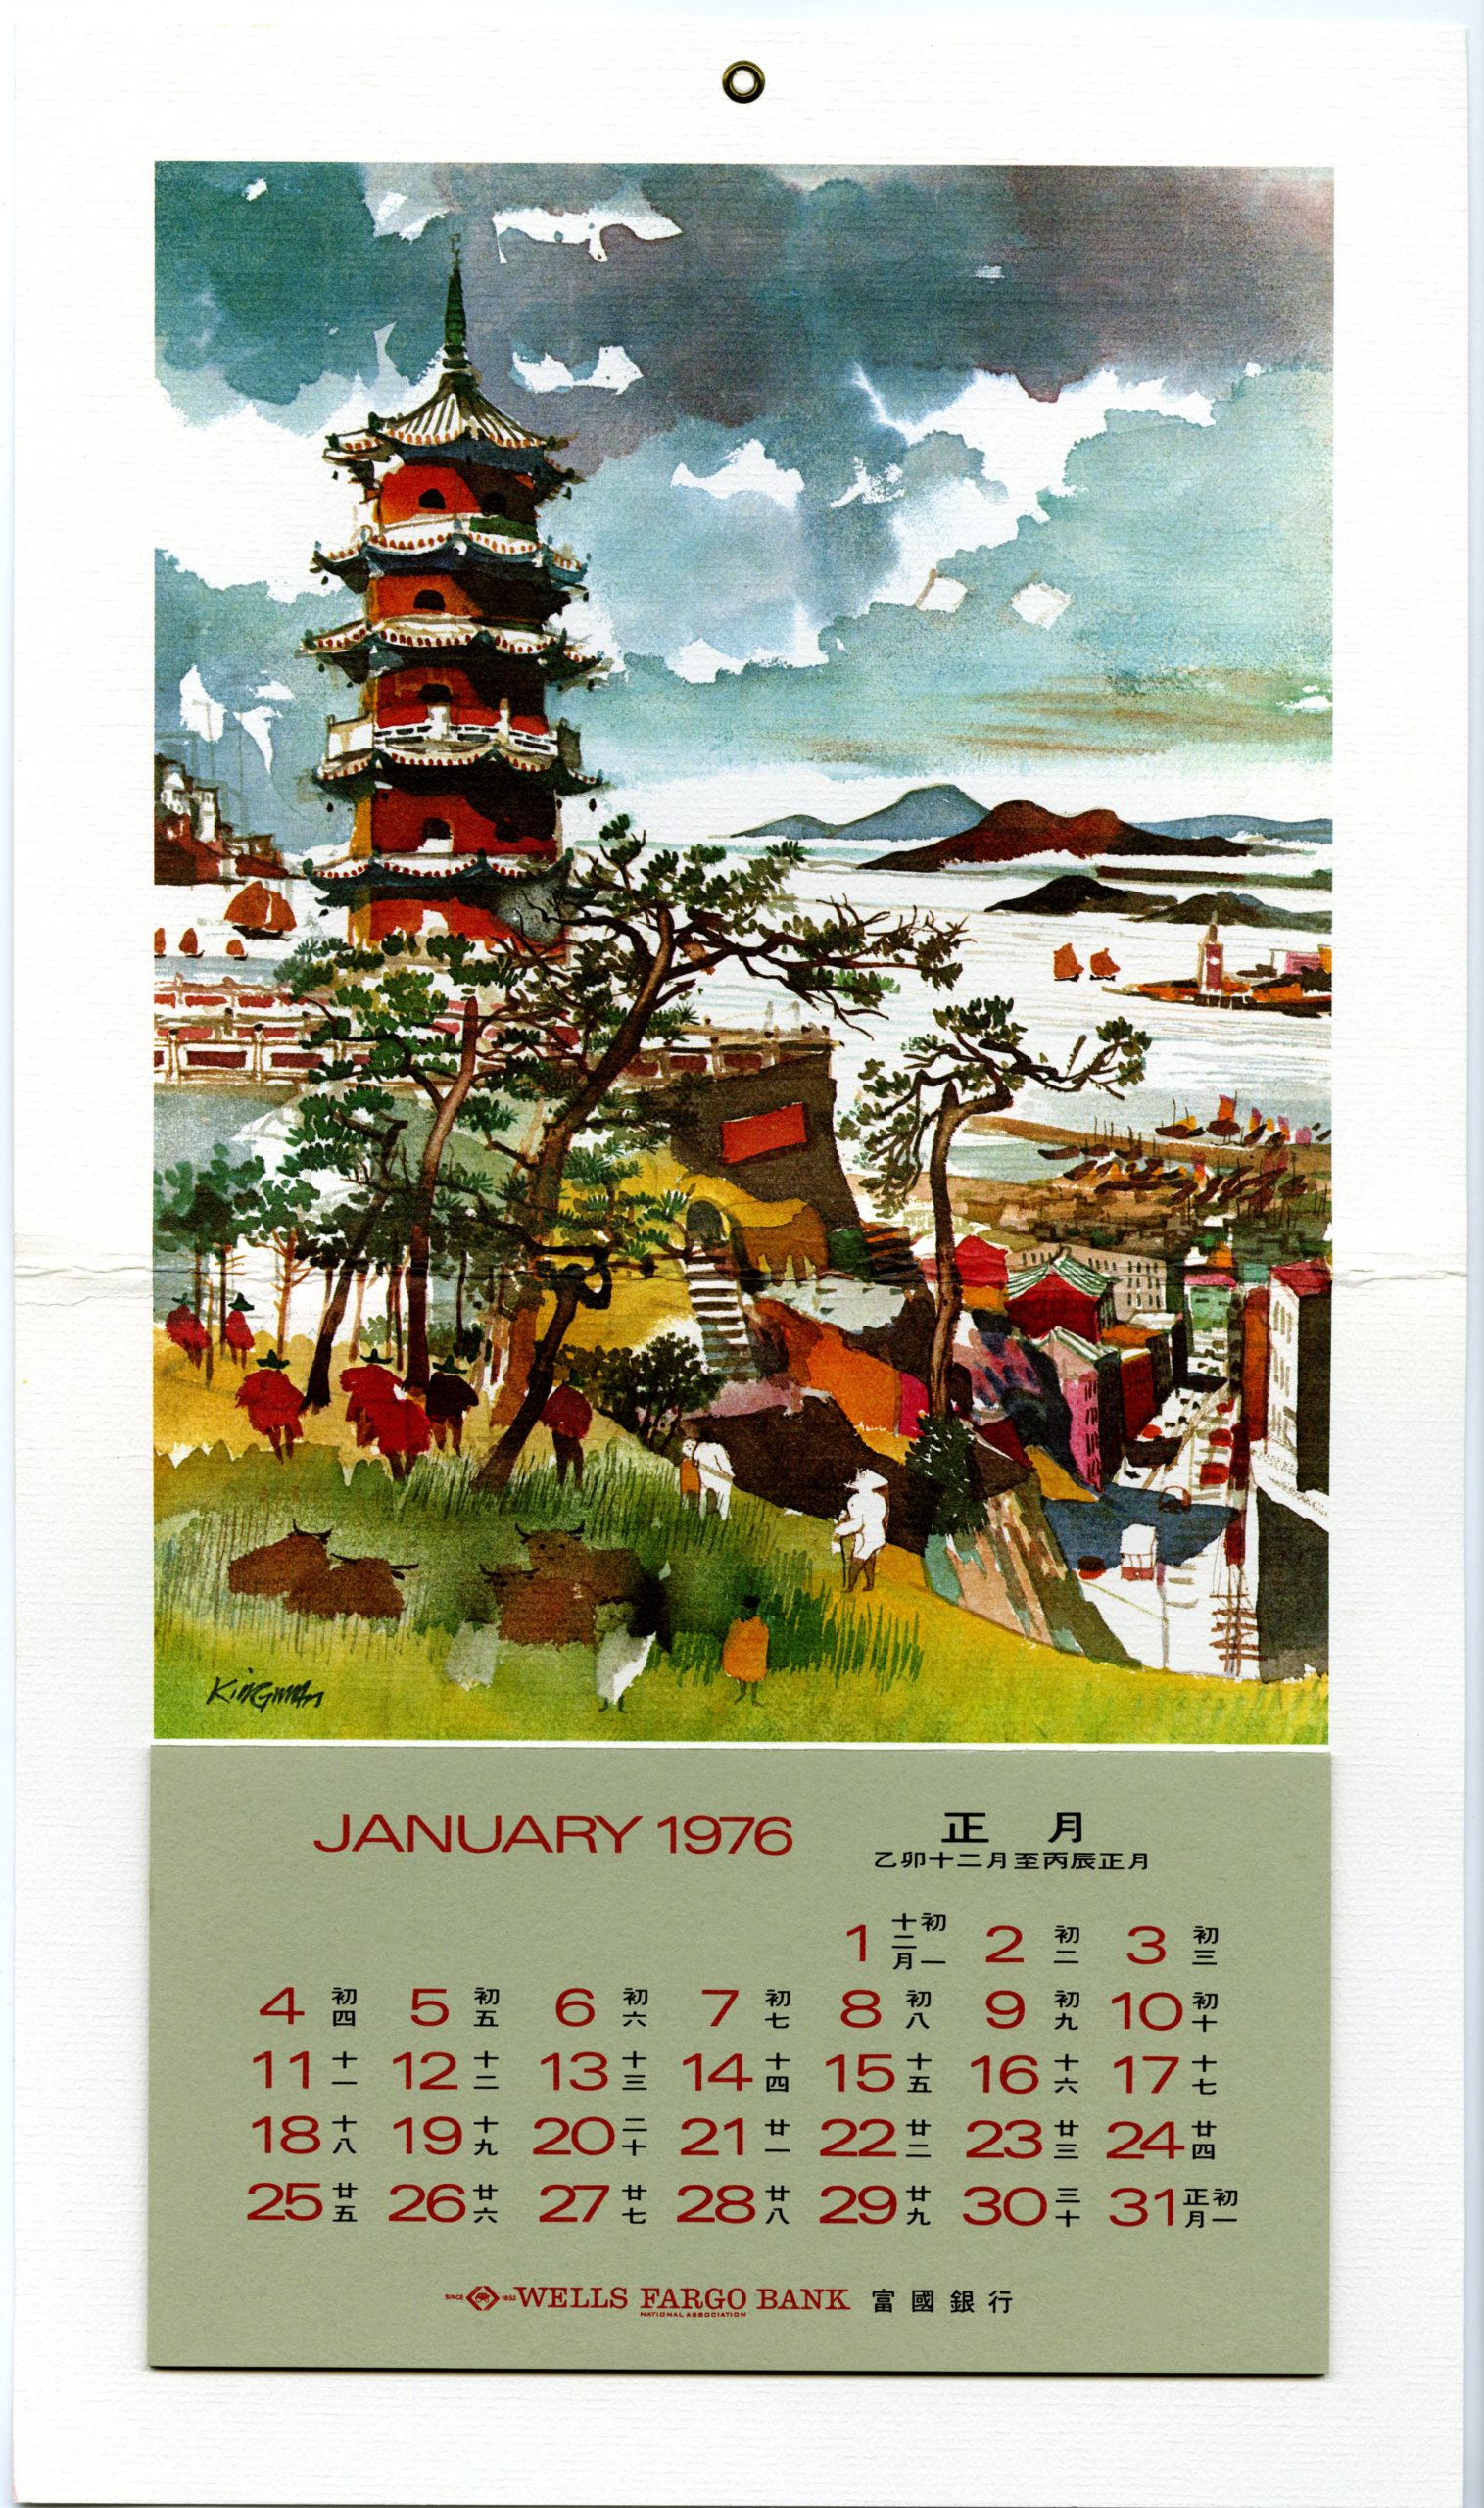 1976 calendar features Asian painting with a Chinese village and temple.